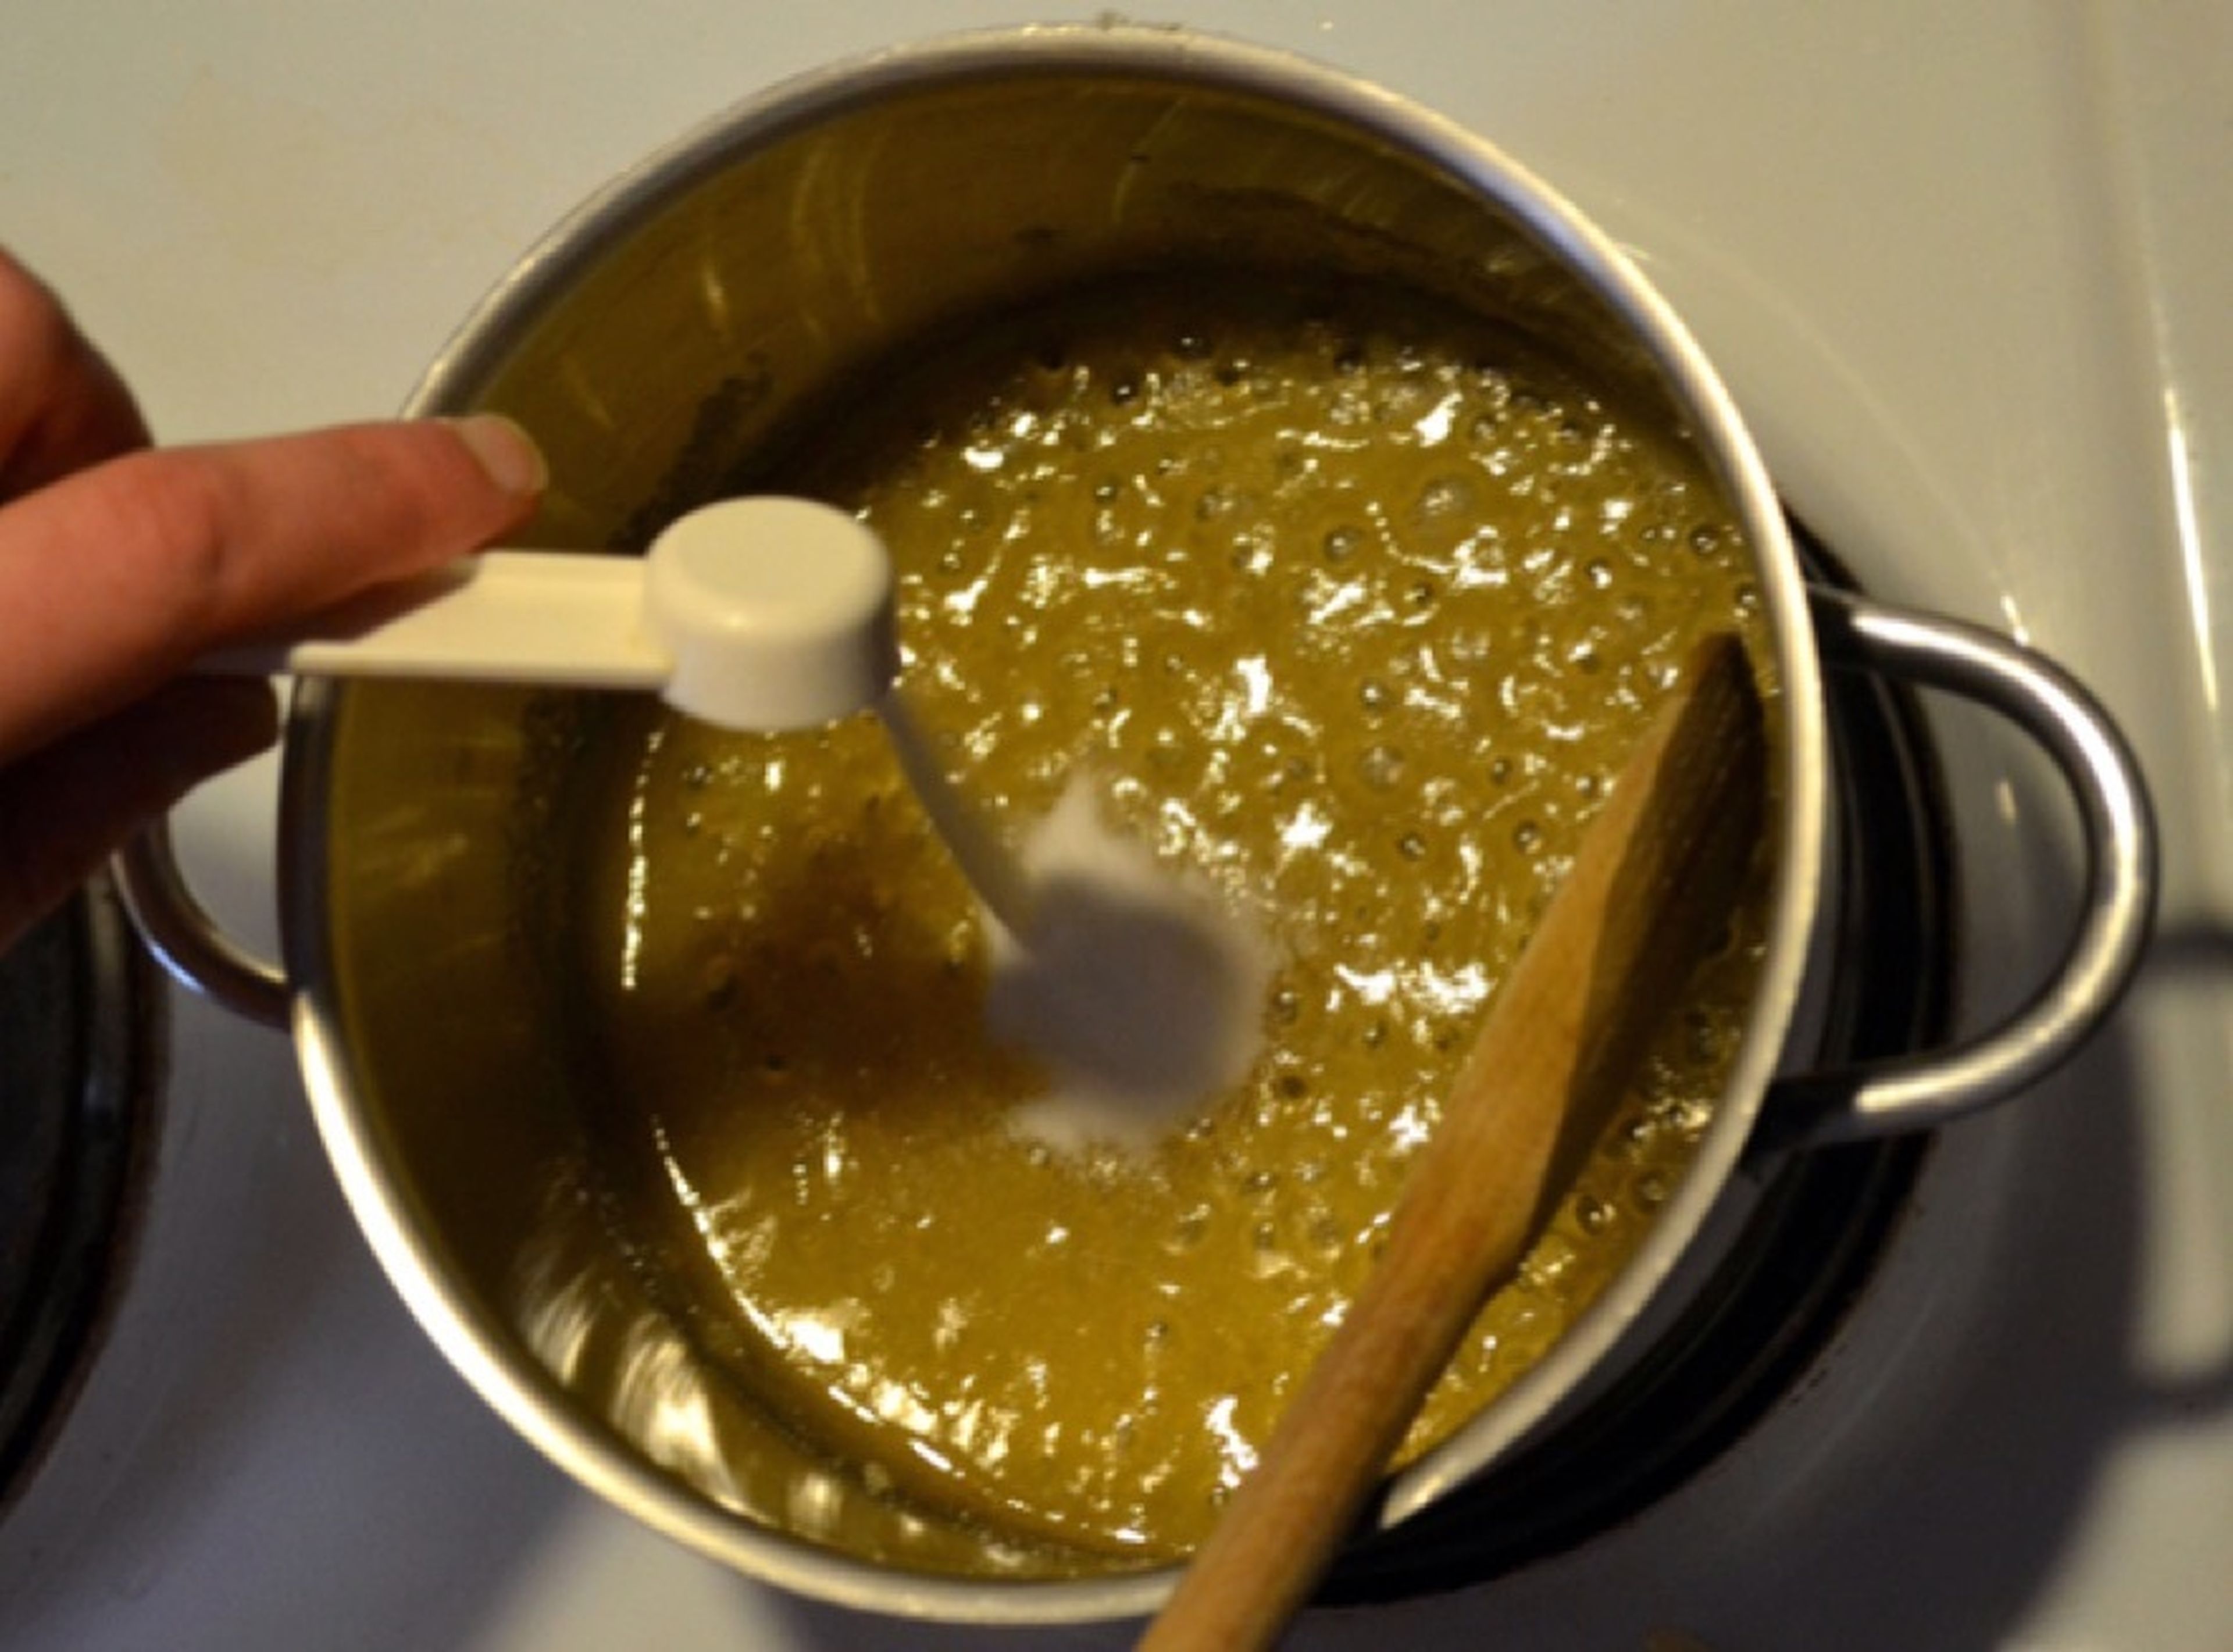 Once bubbling, cook for another 2 min., then add the baking soda and stir vigorously.